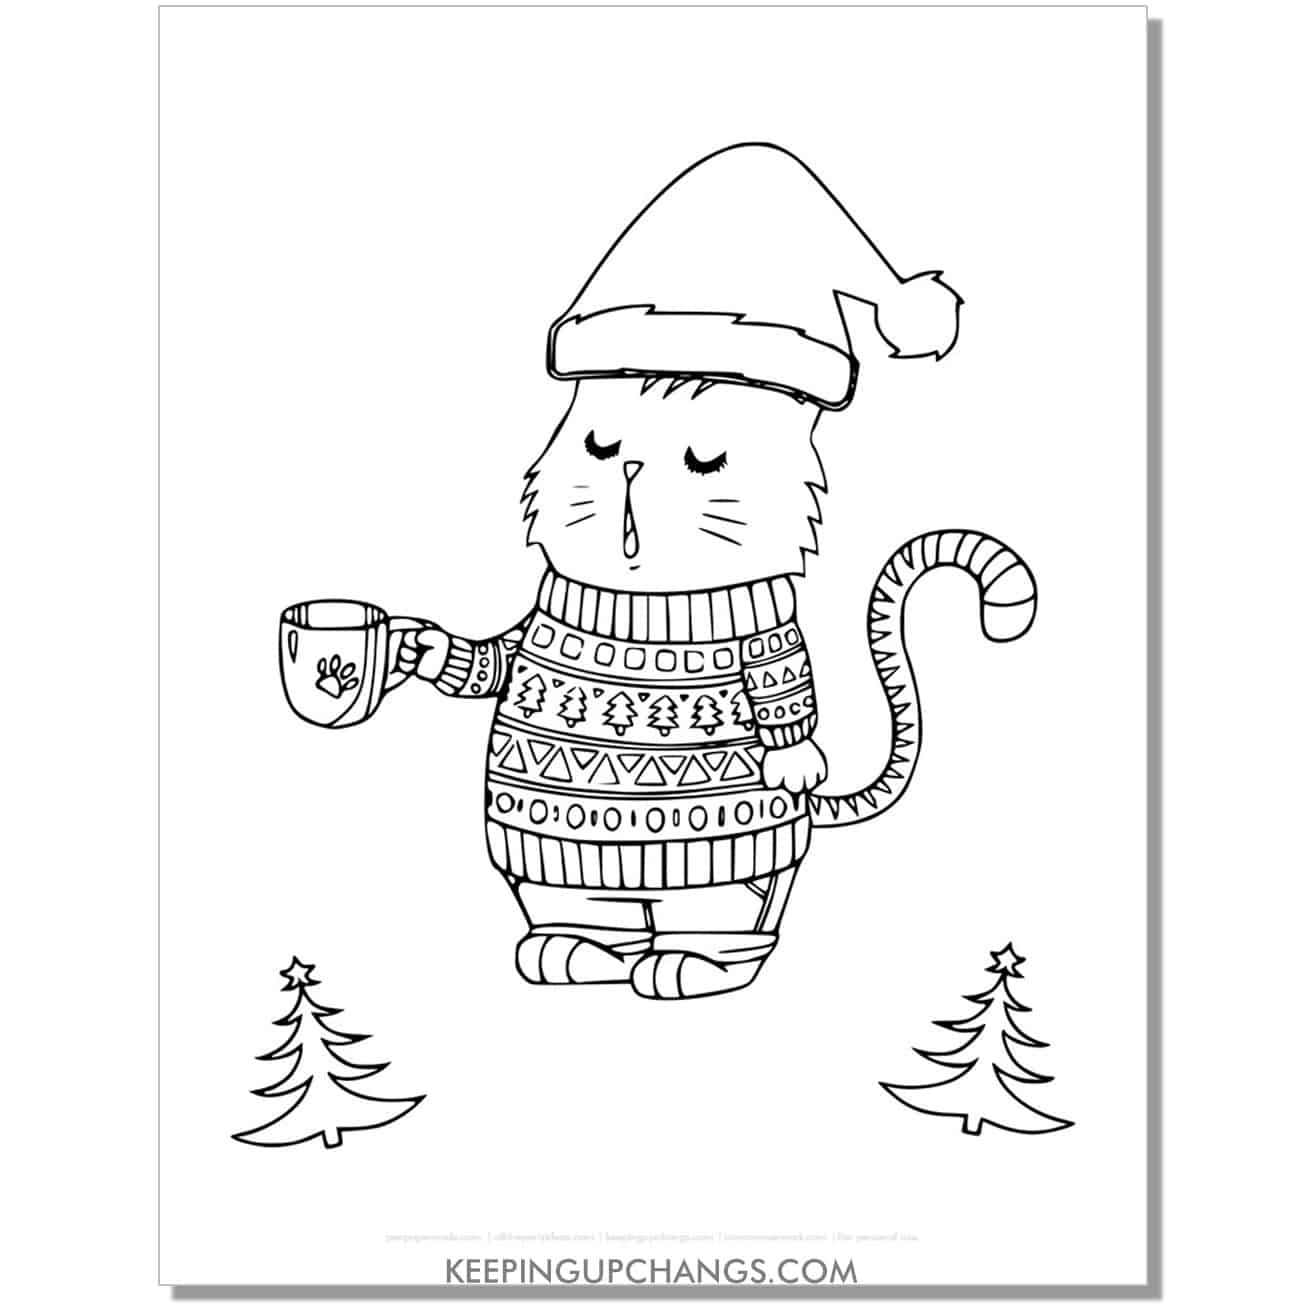 free christmas cat coloring page for adults.